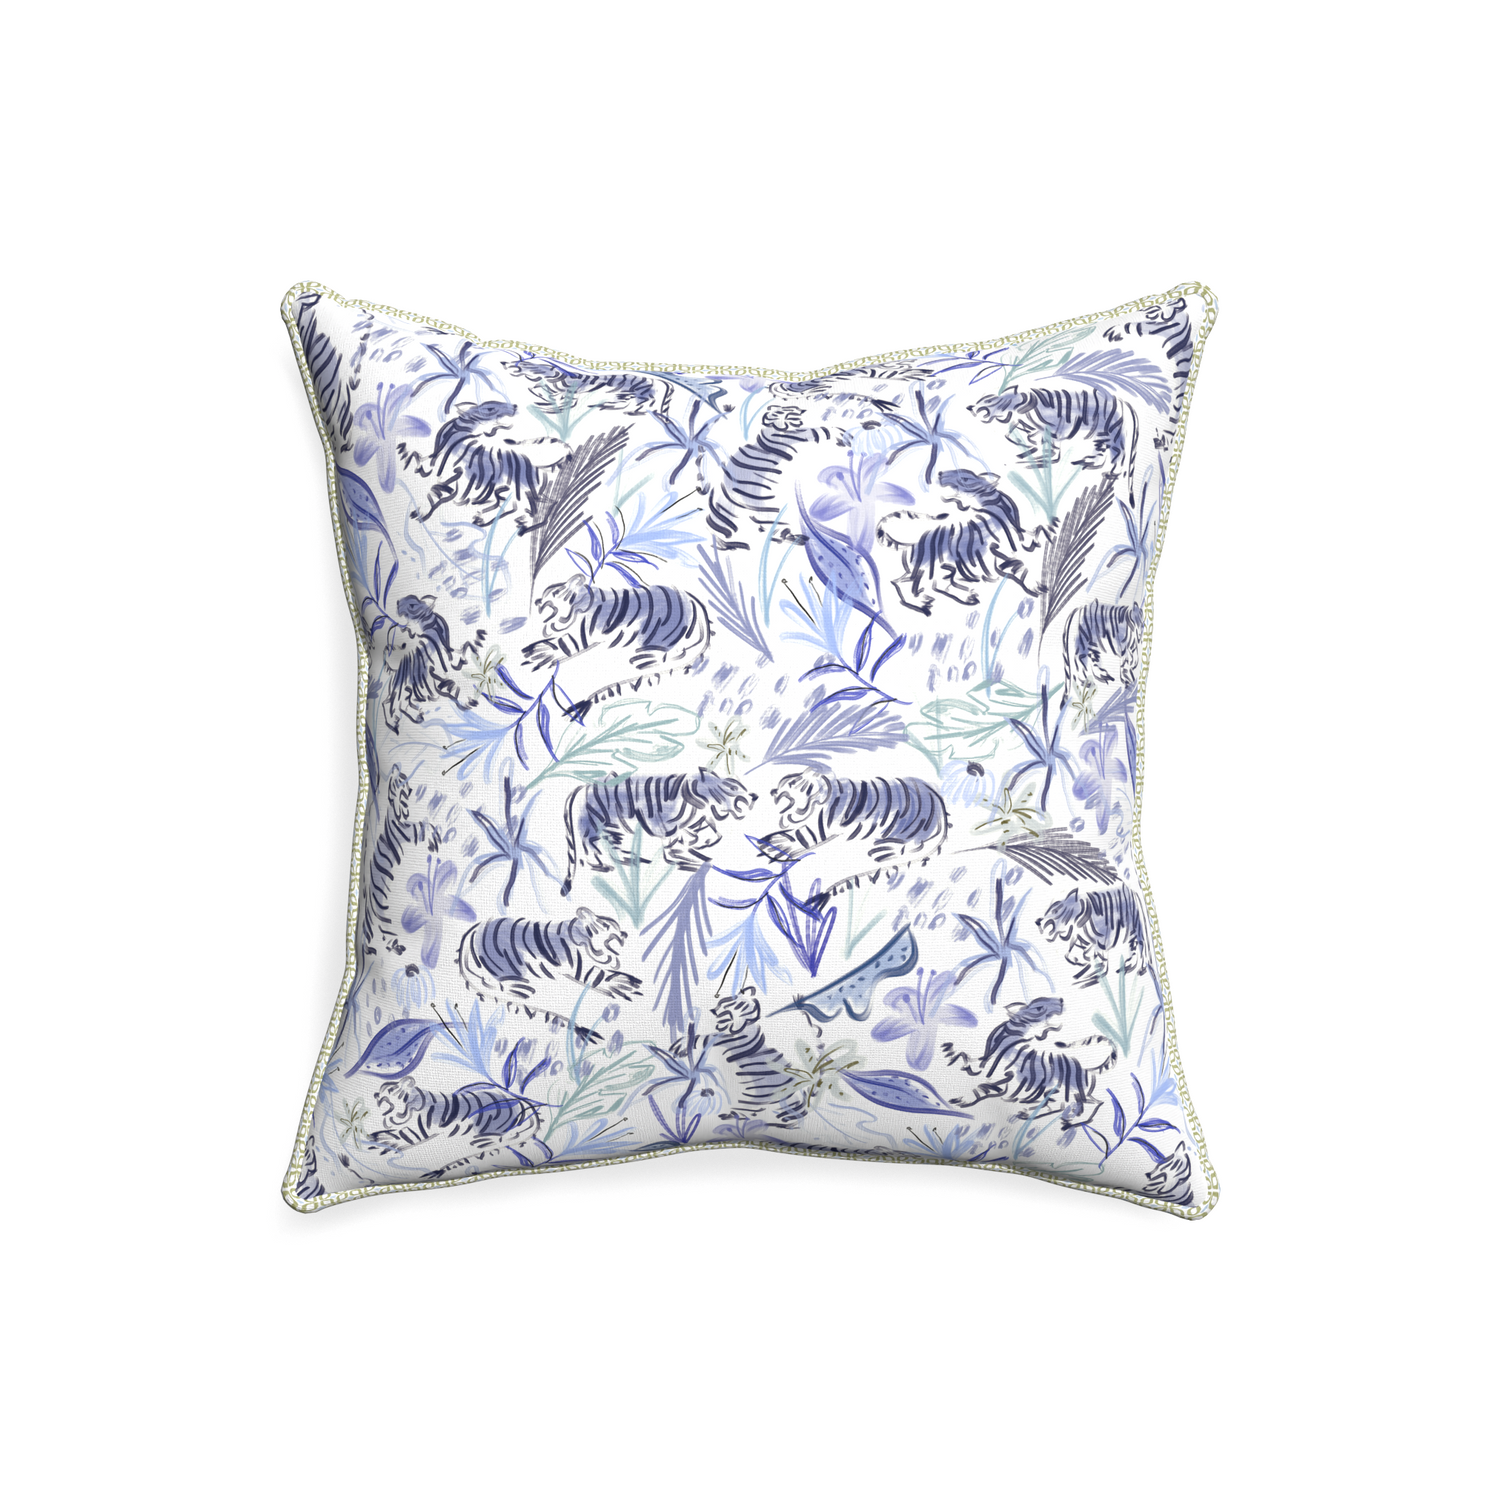 20-square frida blue custom blue with intricate tiger designpillow with l piping on white background